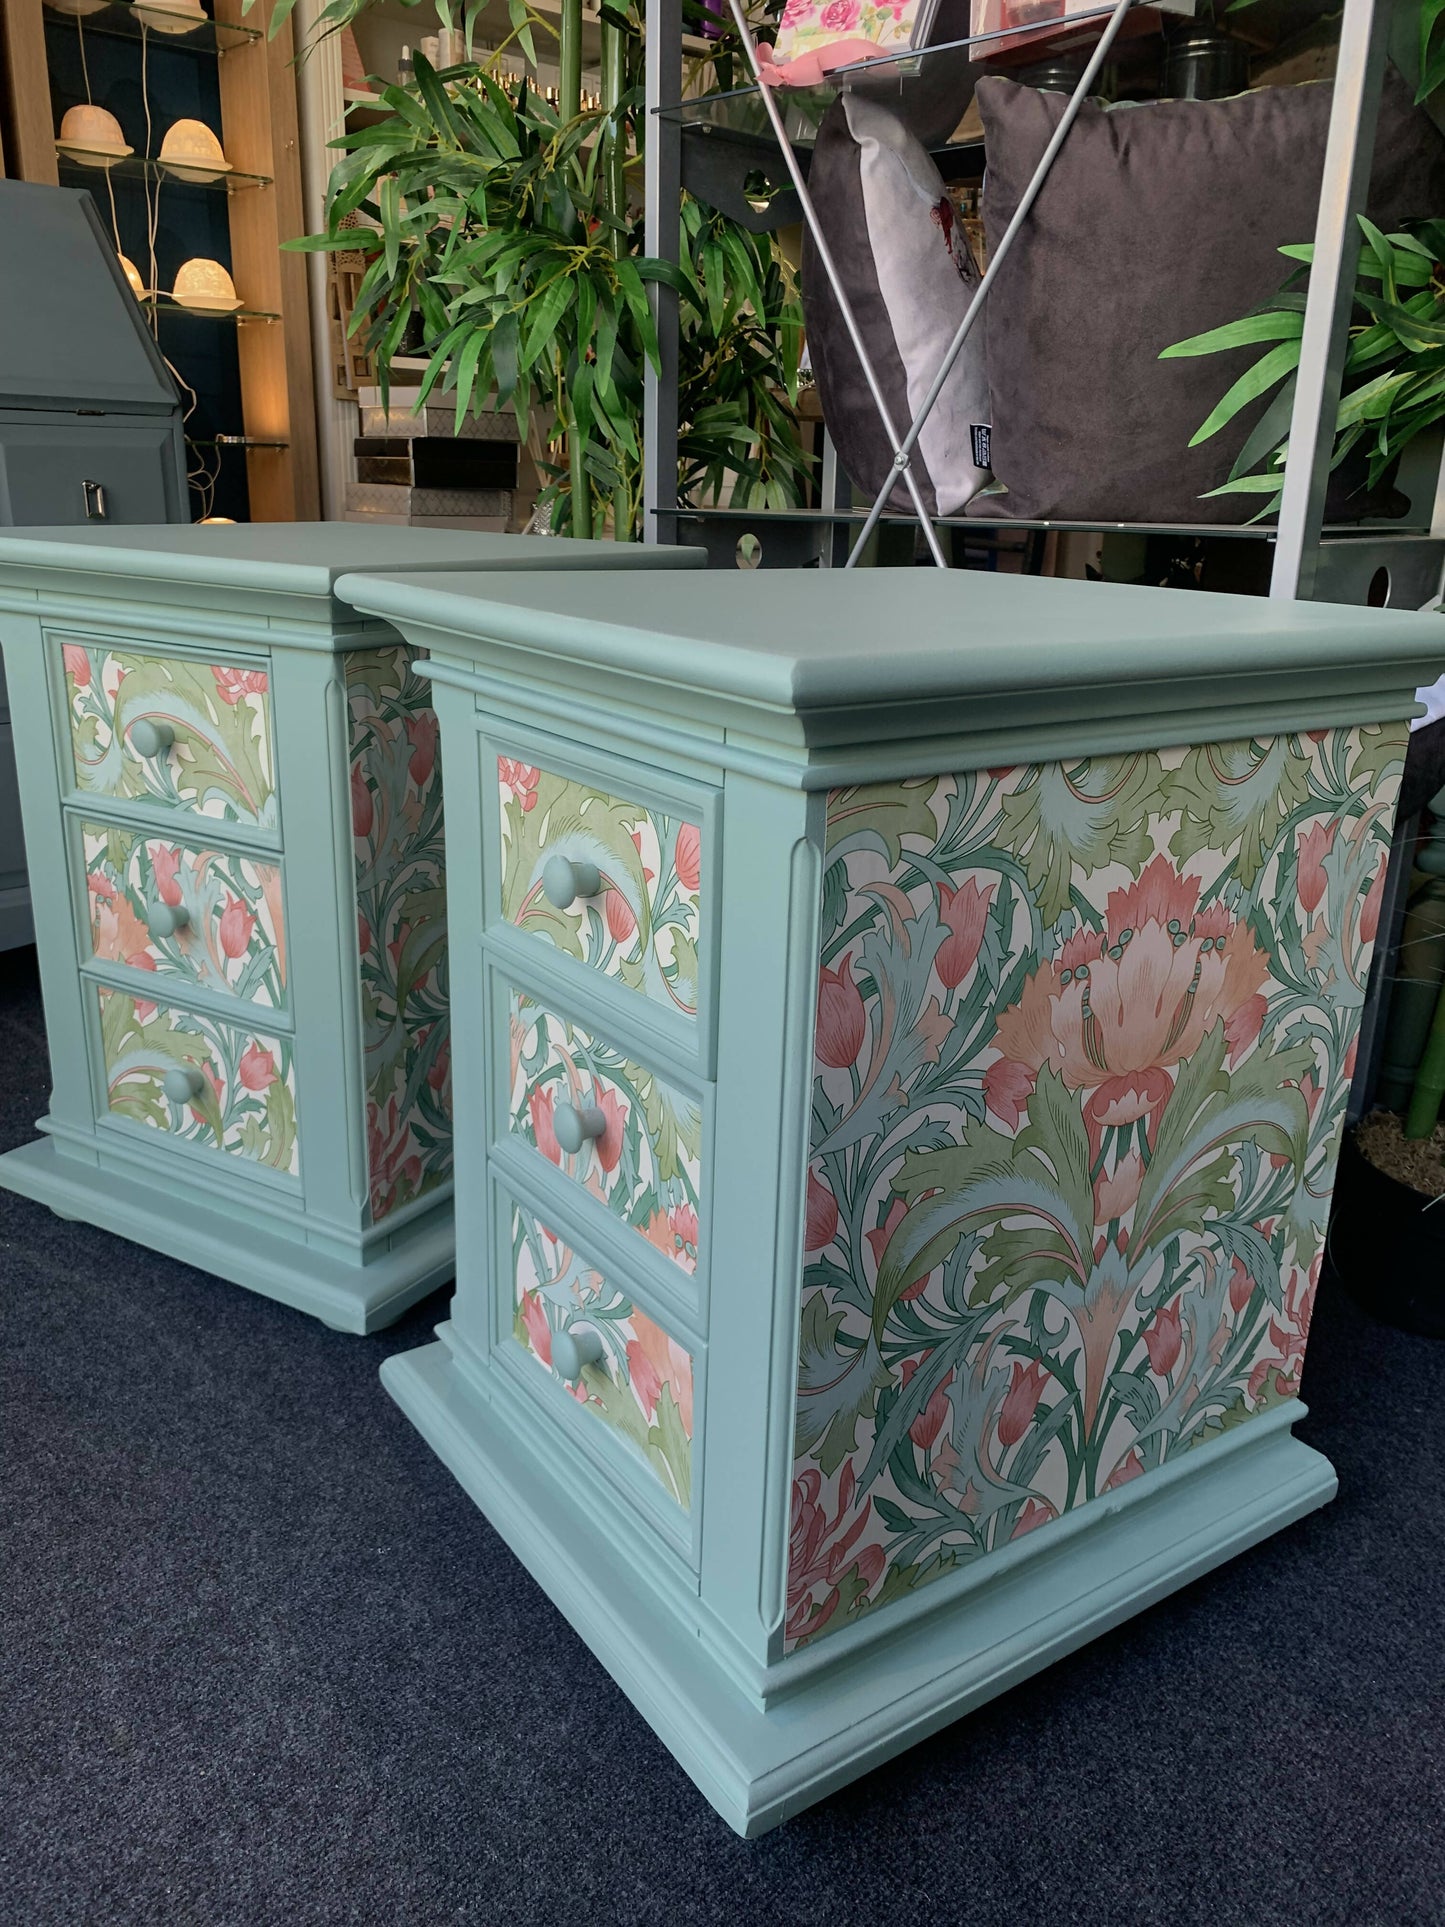 Pair of bedsides William Morris inspired